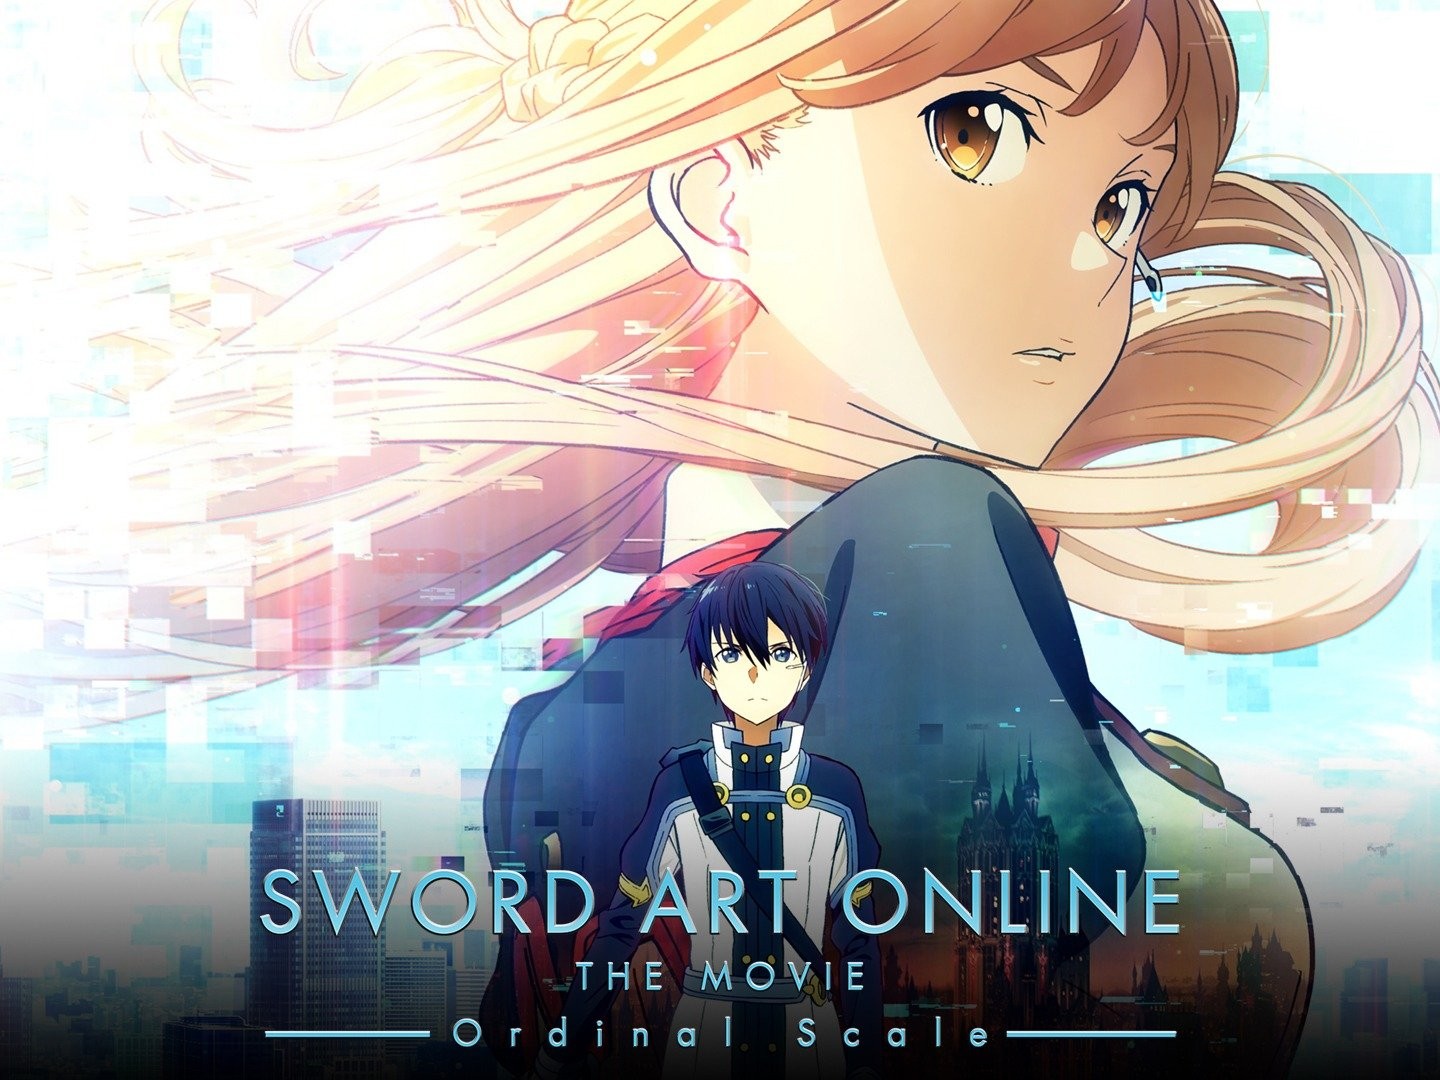 r#101 – sword art online the movie: ordinal scale by #moe404, the